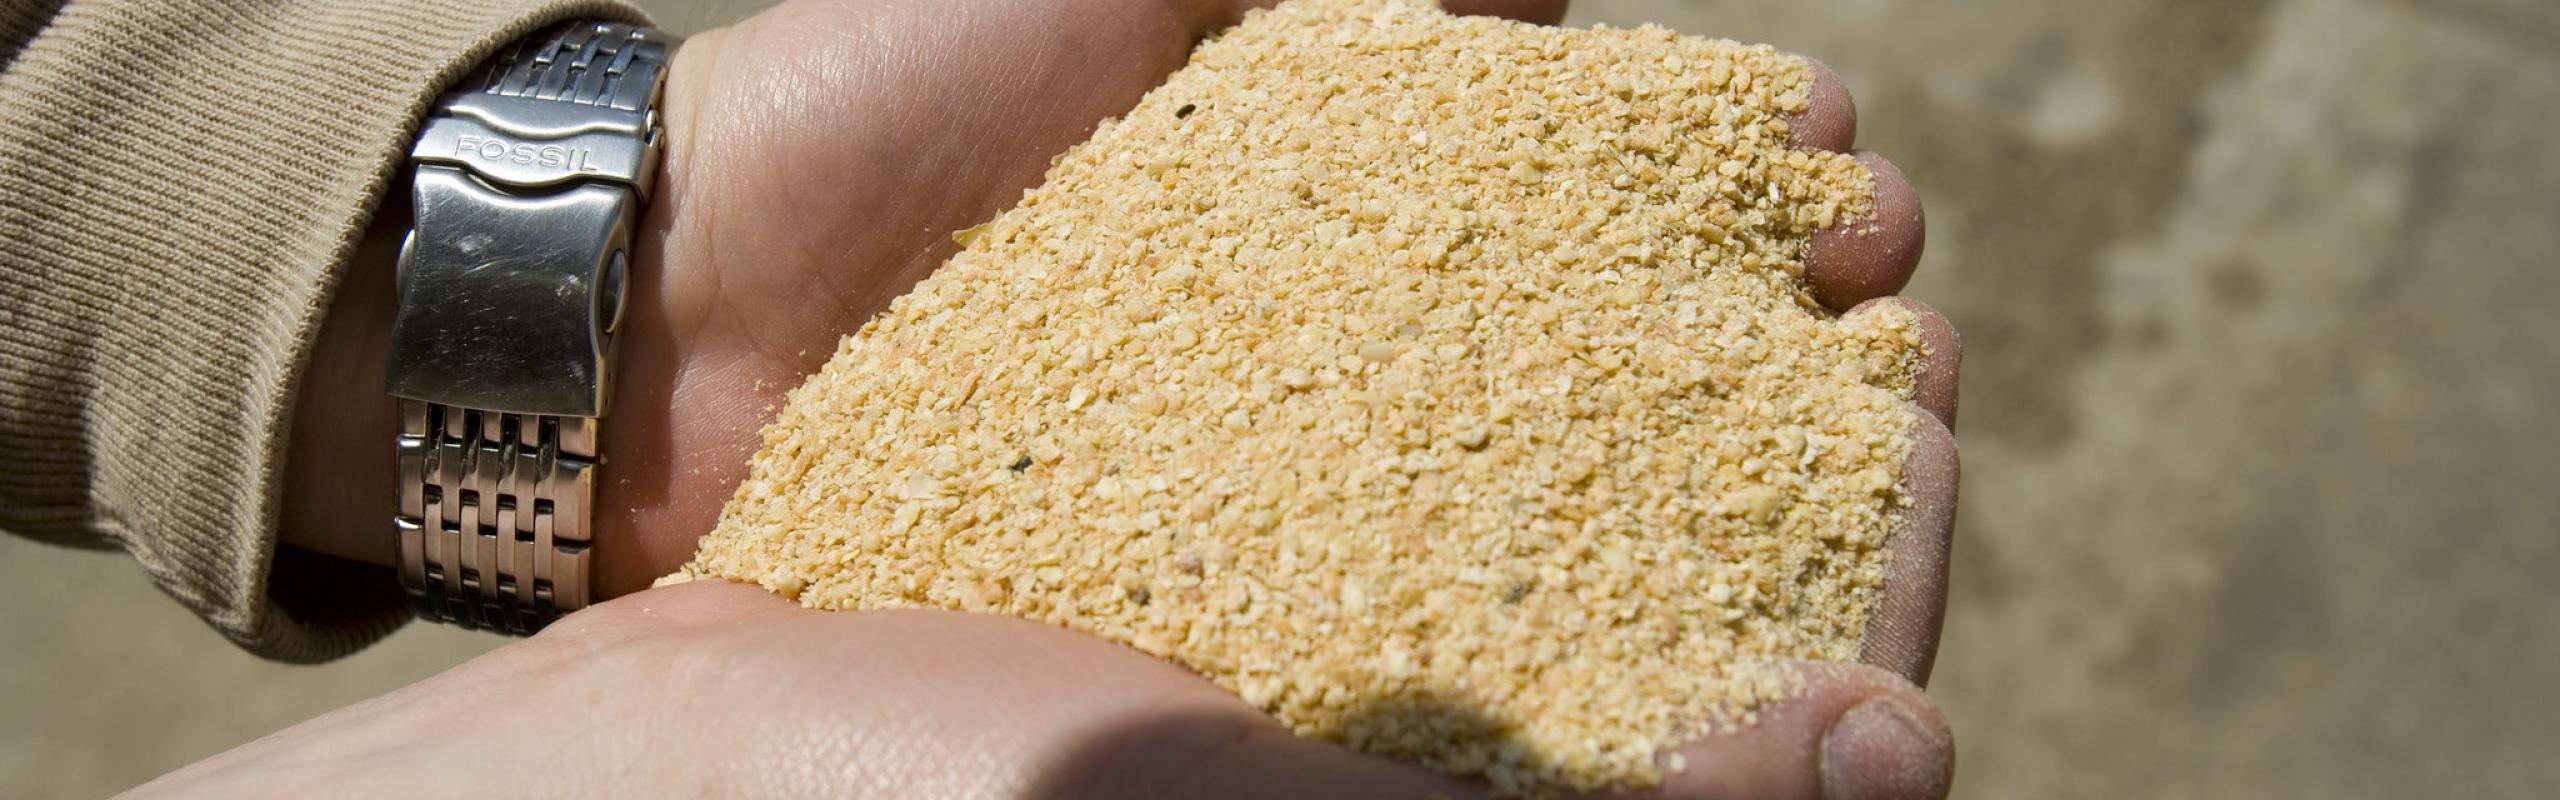 Hands holding pile of soybean meal